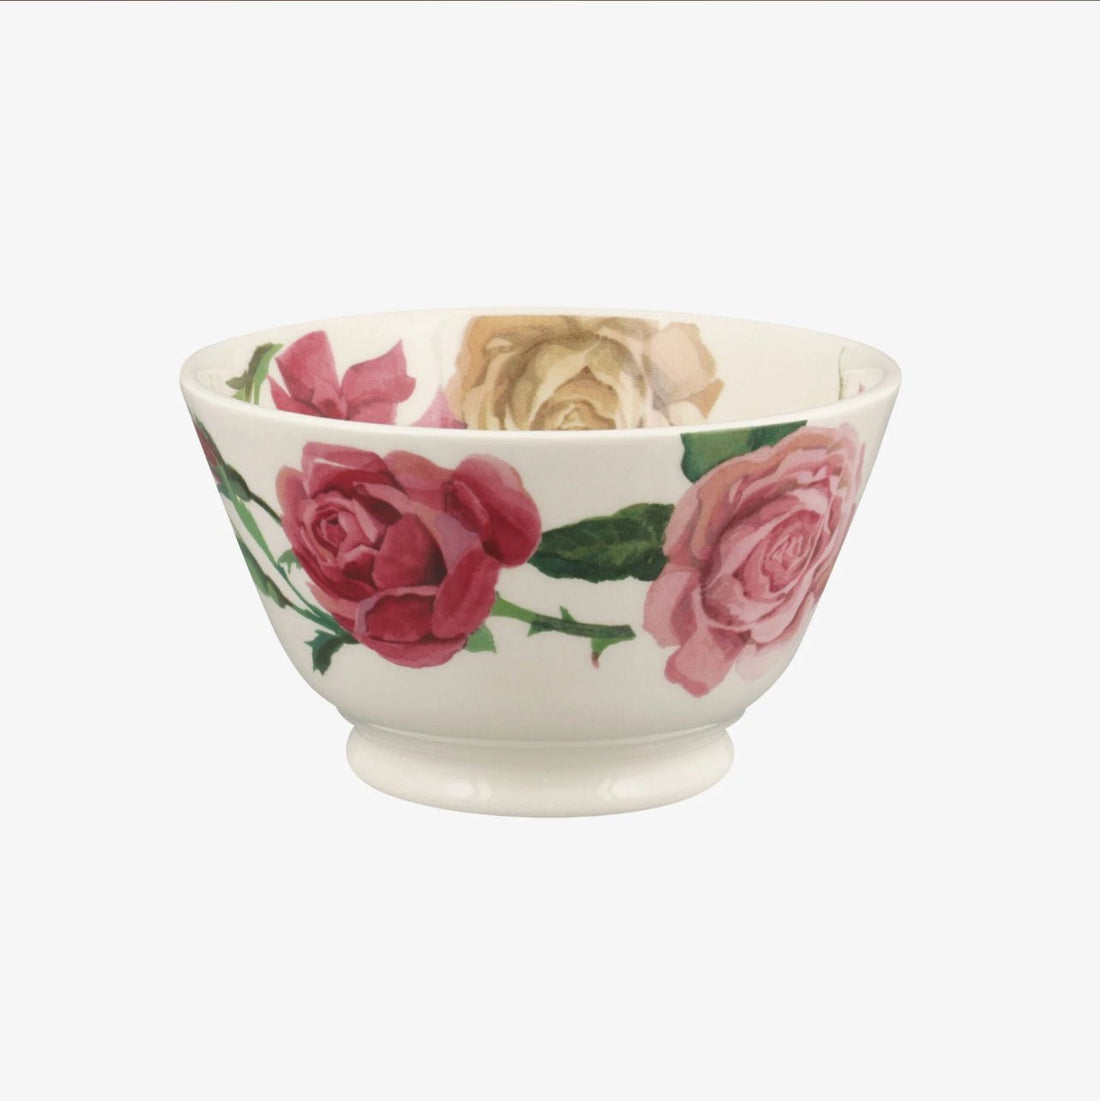 Emma Bridgewater Roses - Small Old Bowl - The Flower Crate